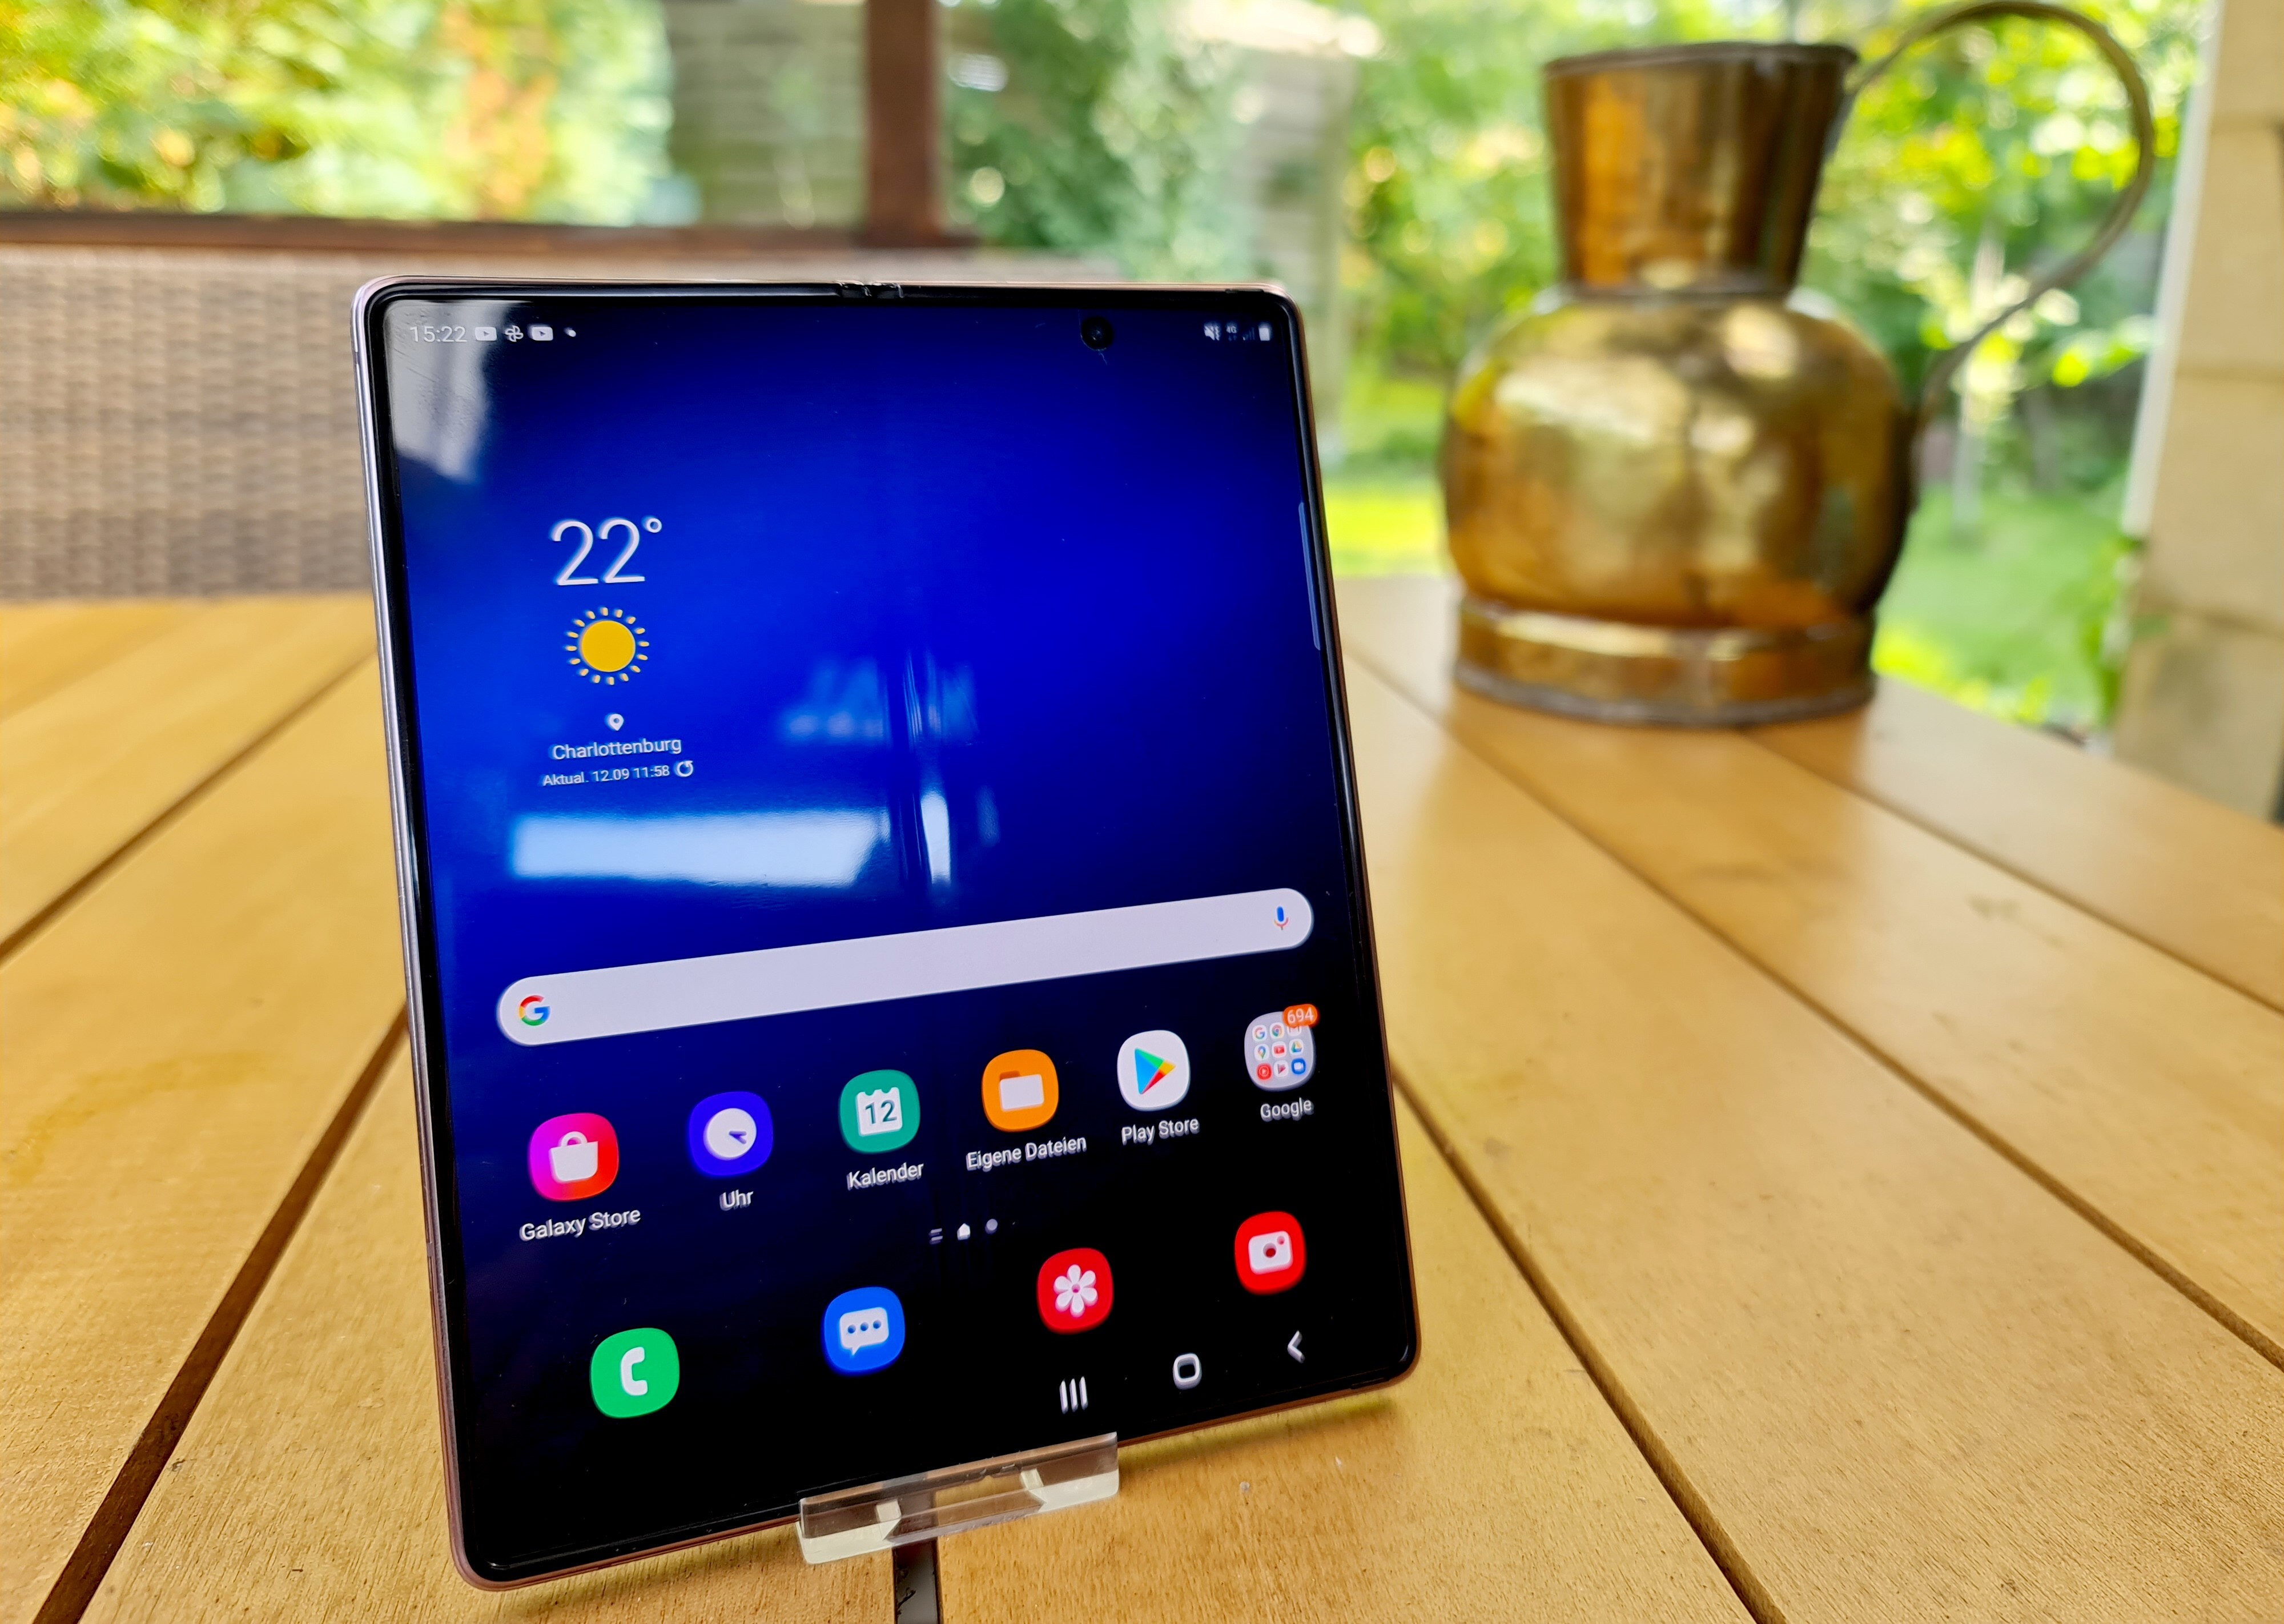 The Samsung Galaxy Z Fold 2: the flaws have been fixed, but are the latest foldable phones worth the extra cost? Photo: Christoph Dernbach/DPA